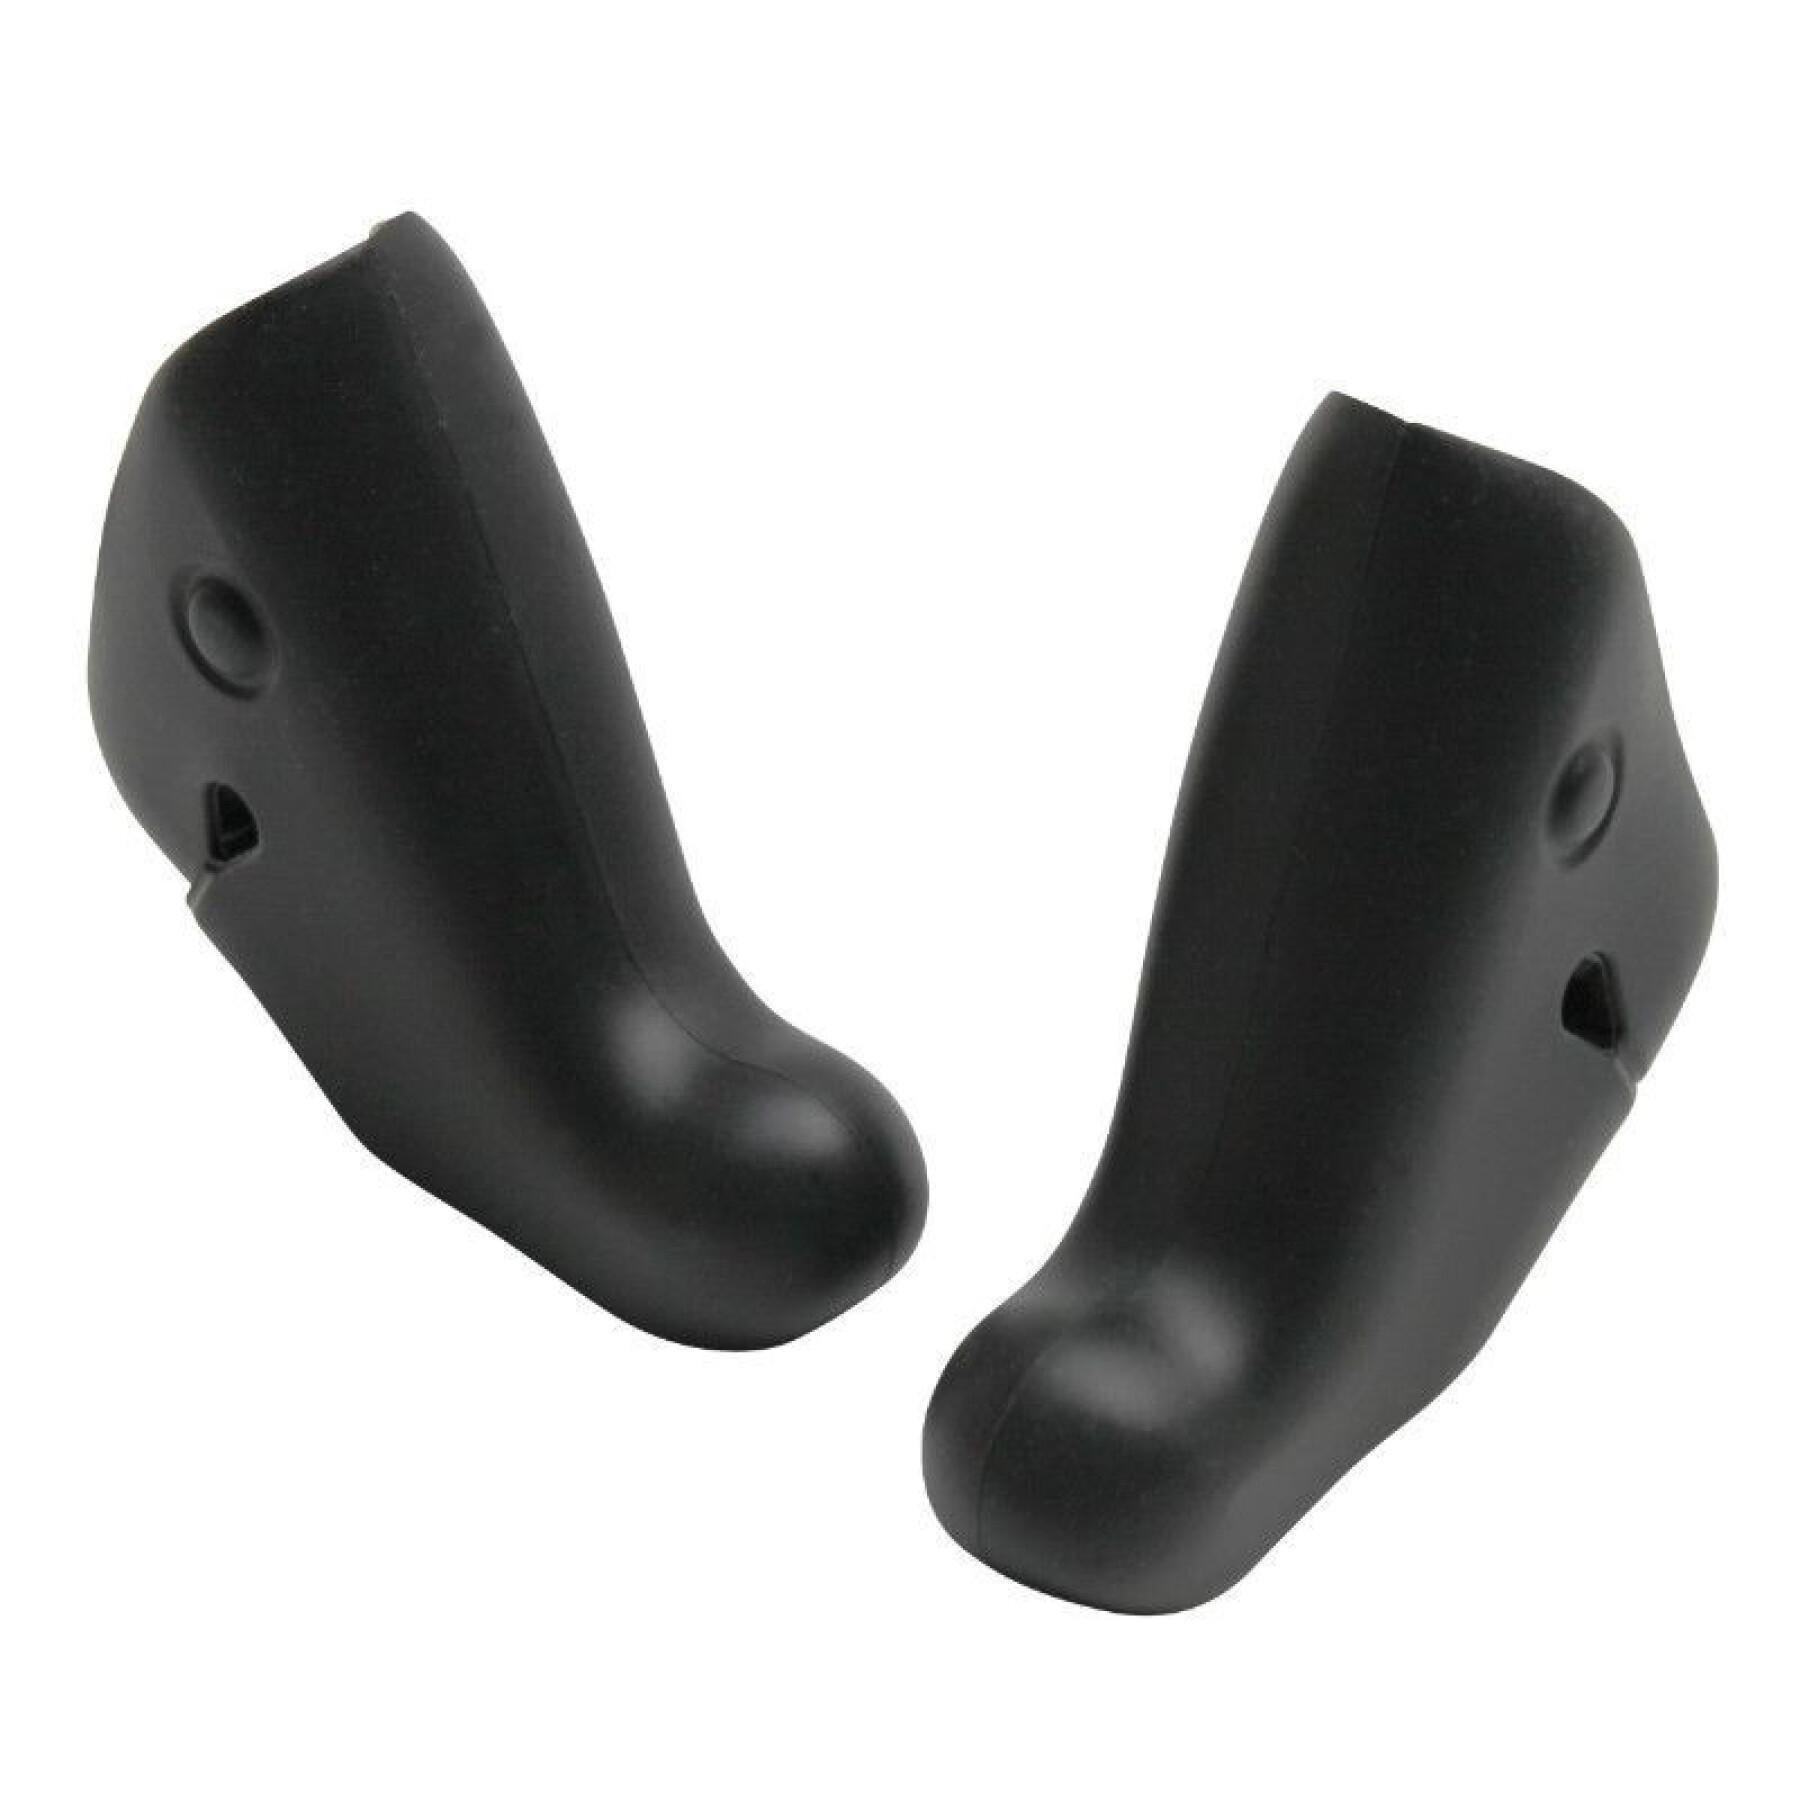 Pair of hand rests P2R Campagnolo Ergopower 2009